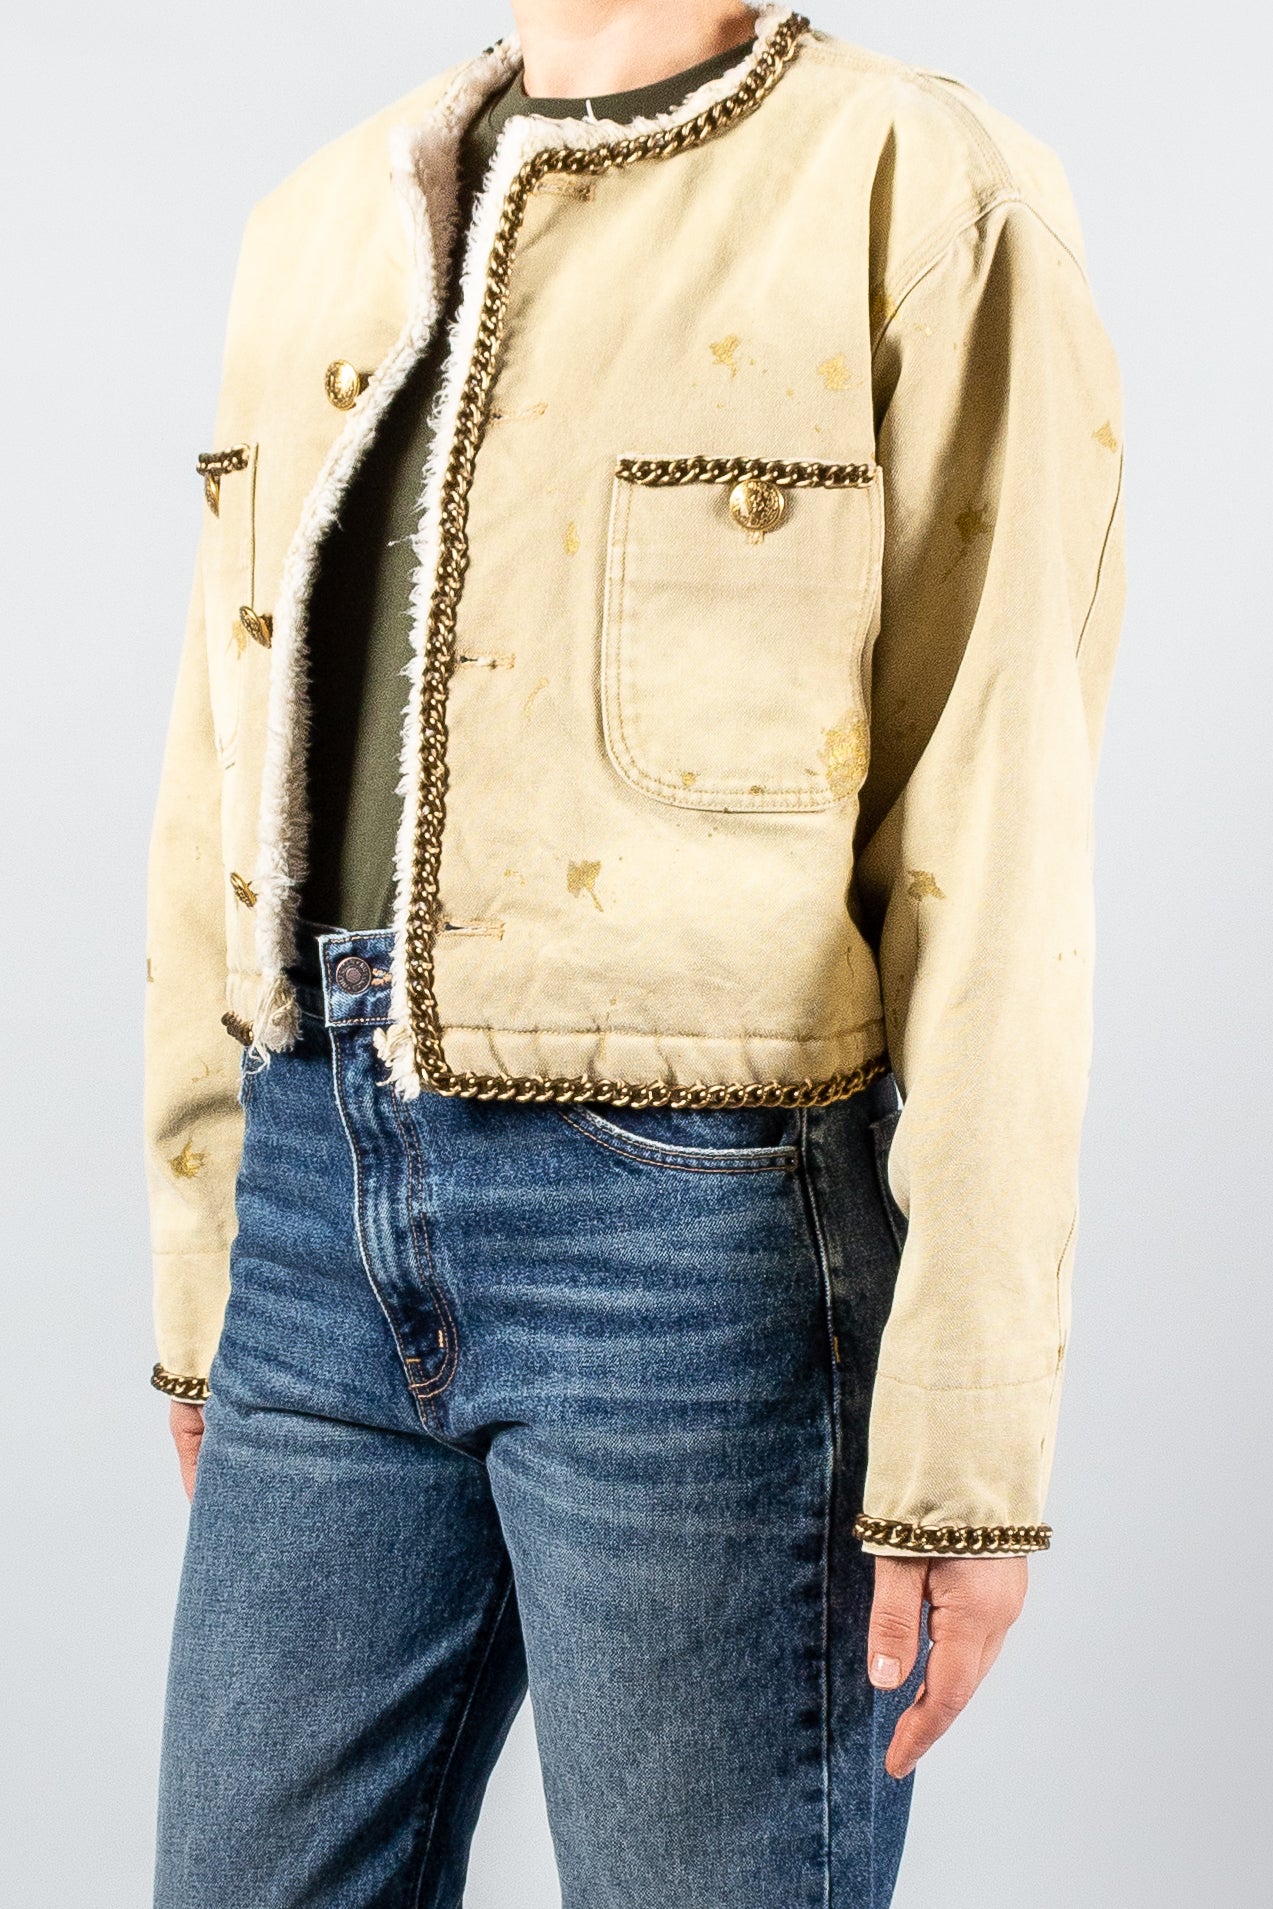 R13 Denim Cropped Chore Jacket-Jackets and Blazers-Misch-Boutique-Vancouver-Canada-misch.ca